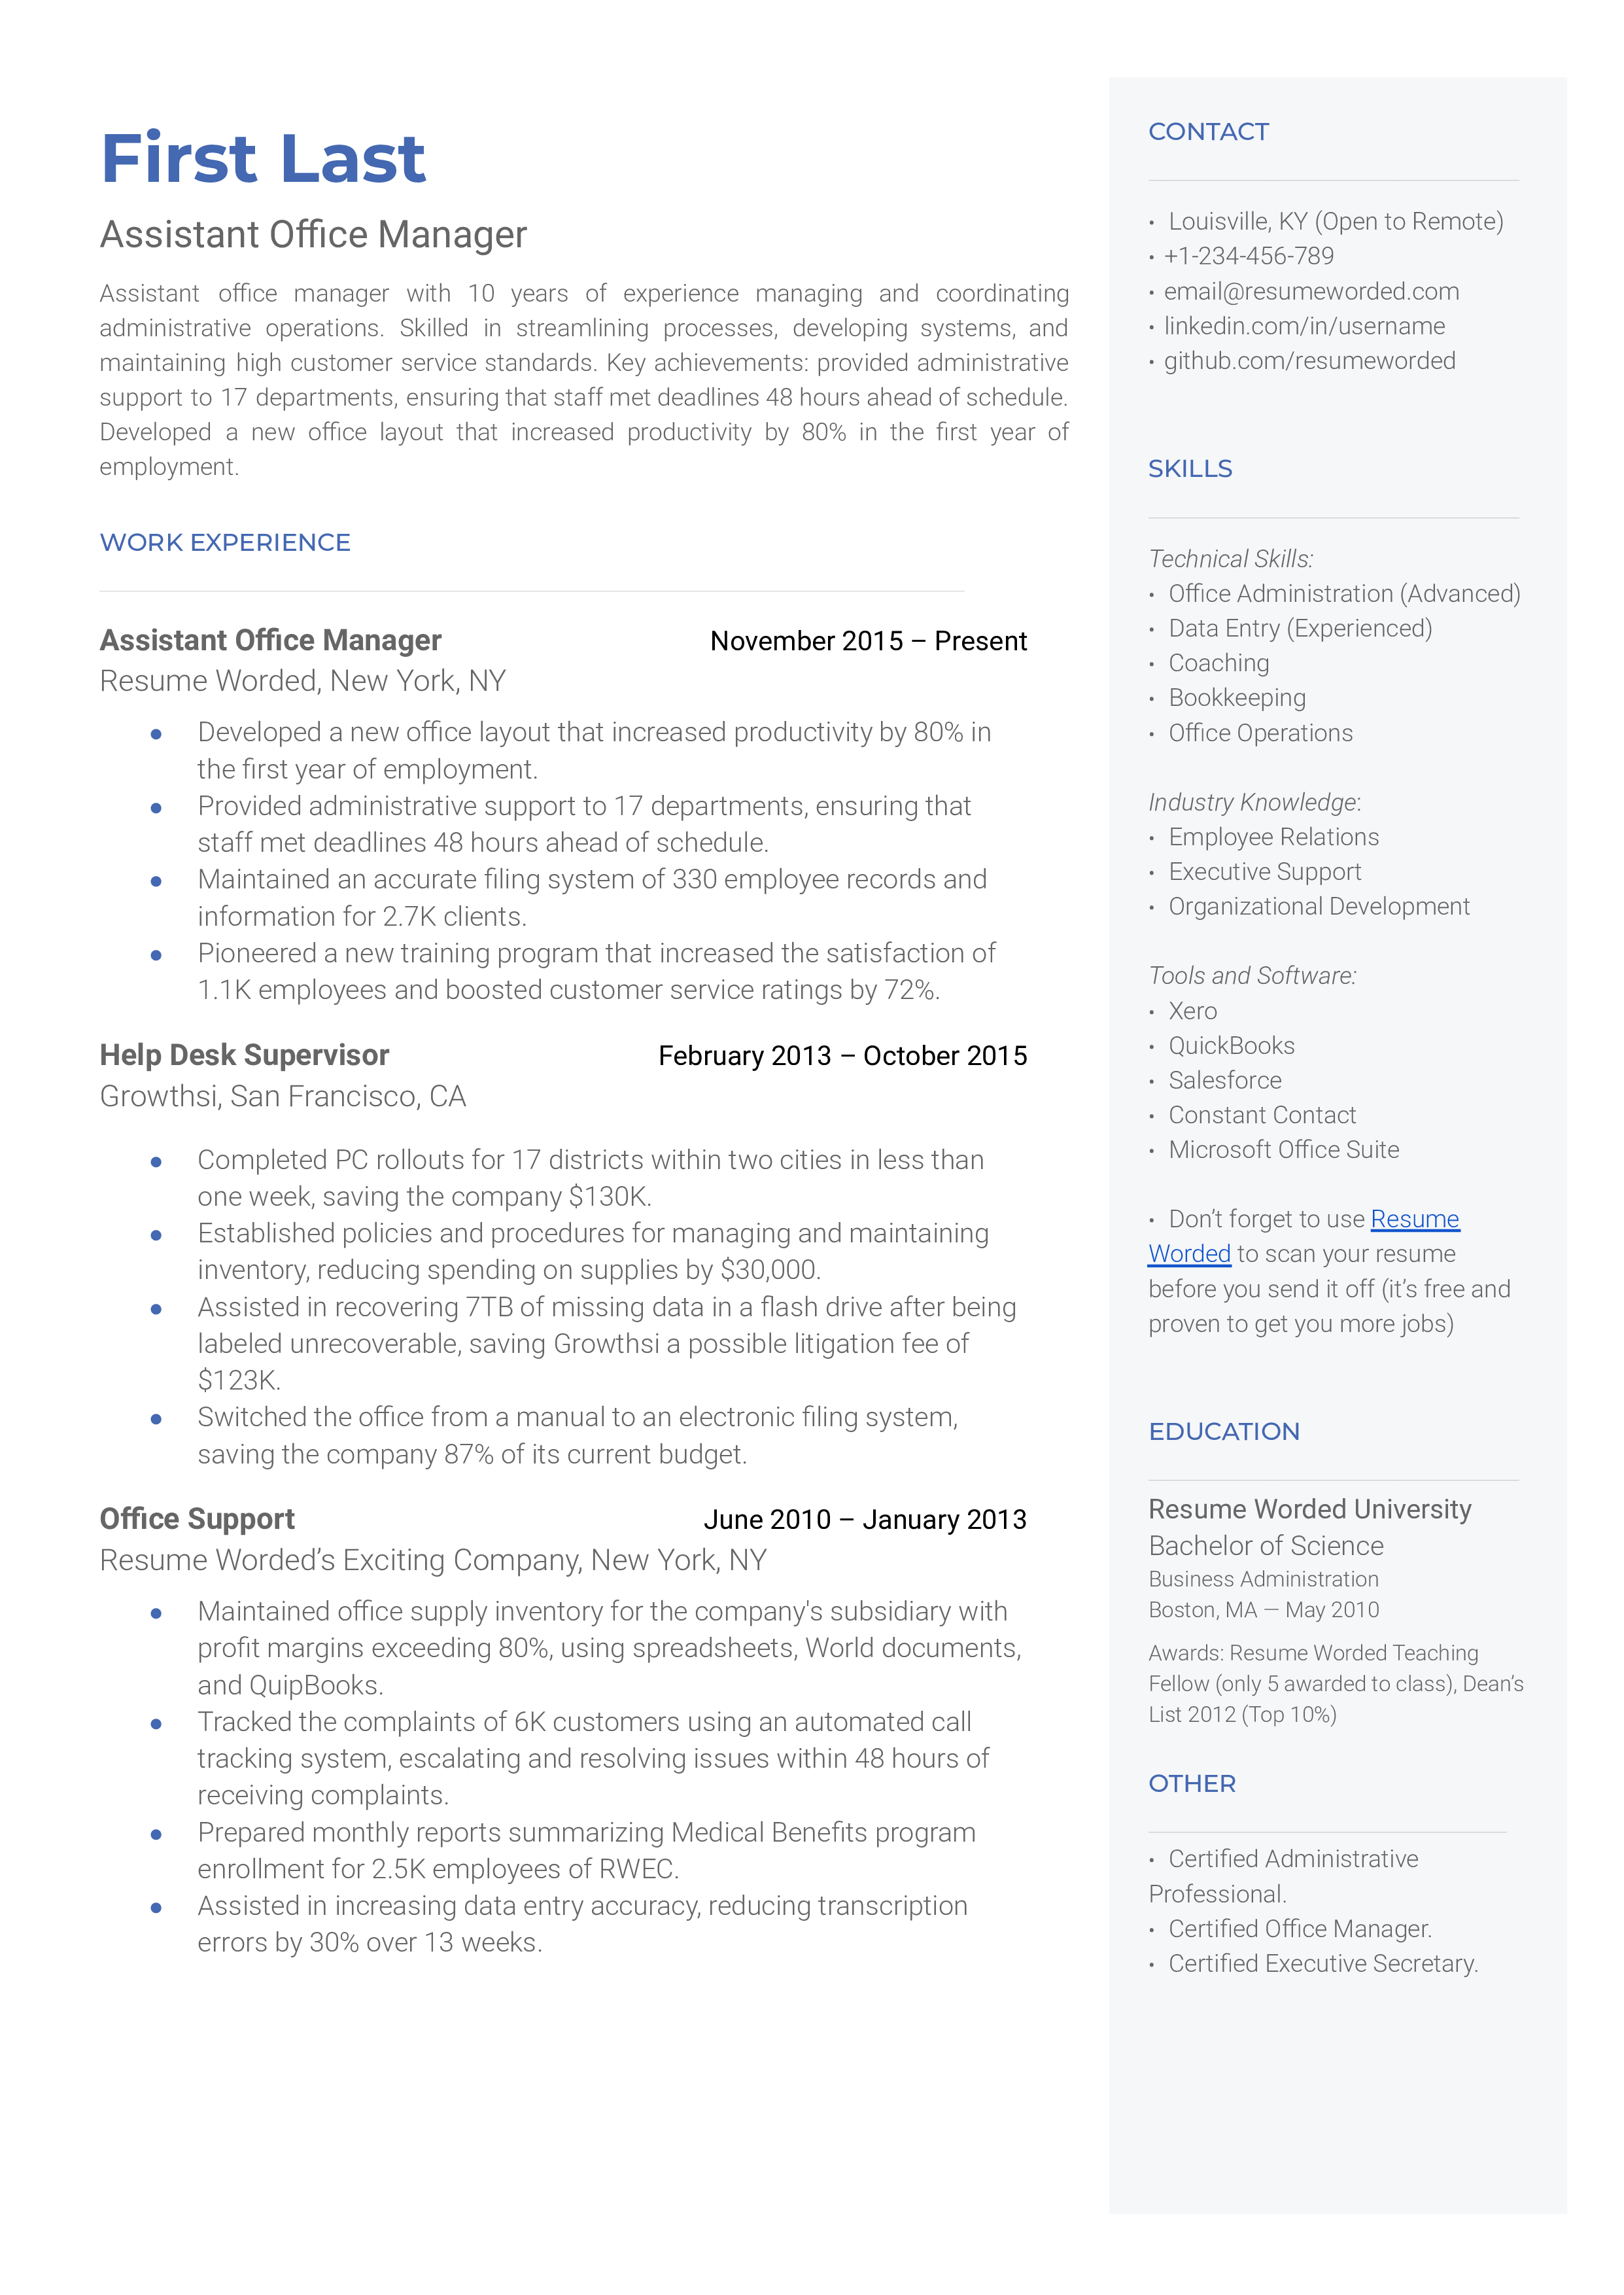 A detailed CV for an Assistant Office Manager position.